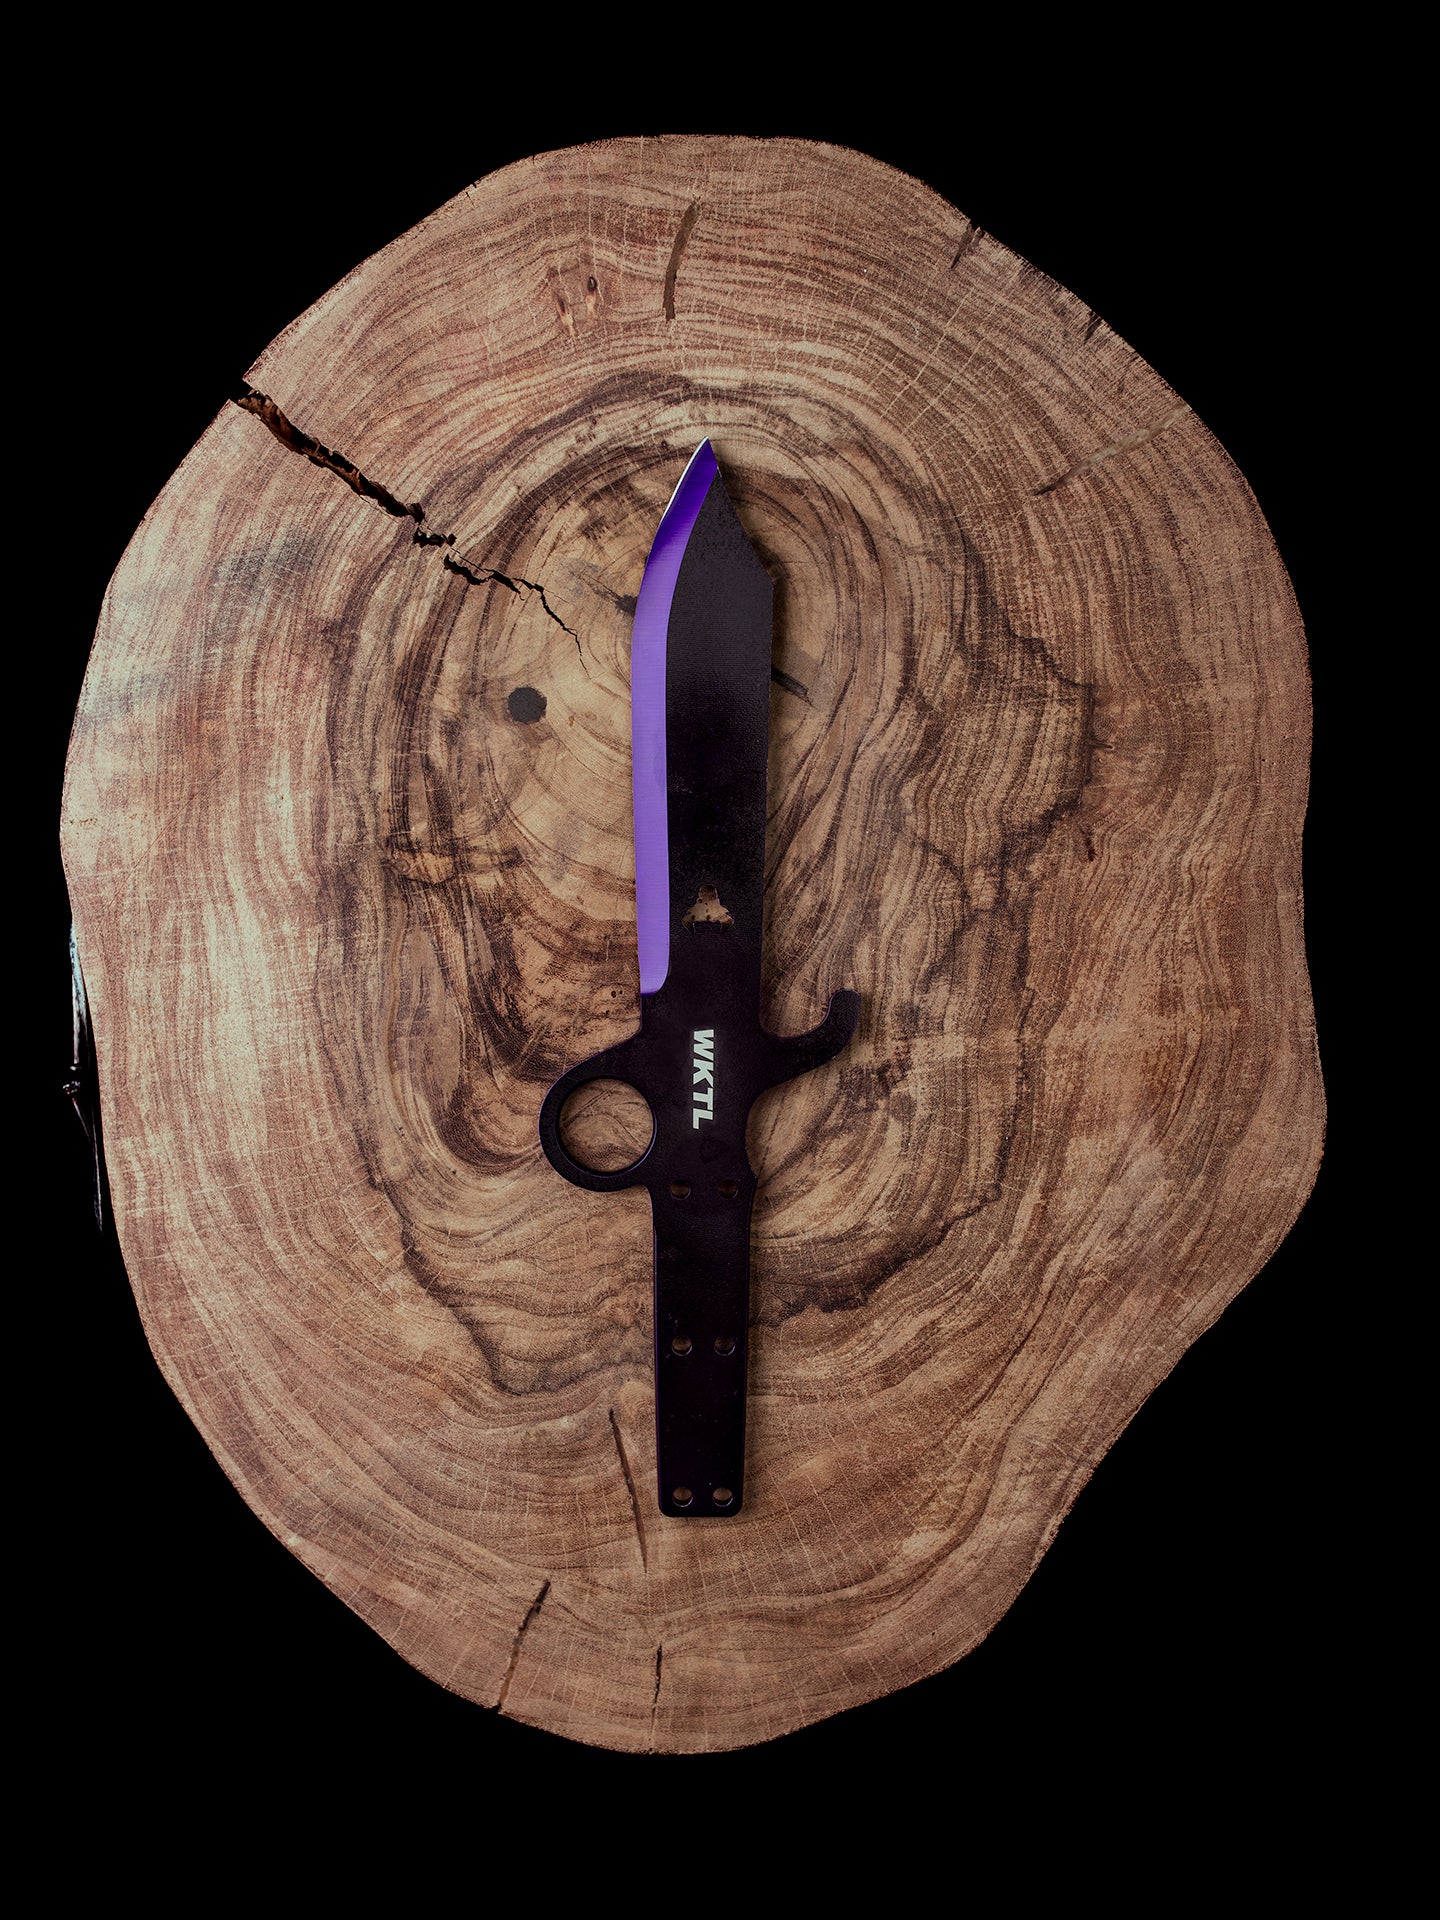 World Knife Throwing League (WKTL) Certified Toro Competition Throwing Knife, The Bandito